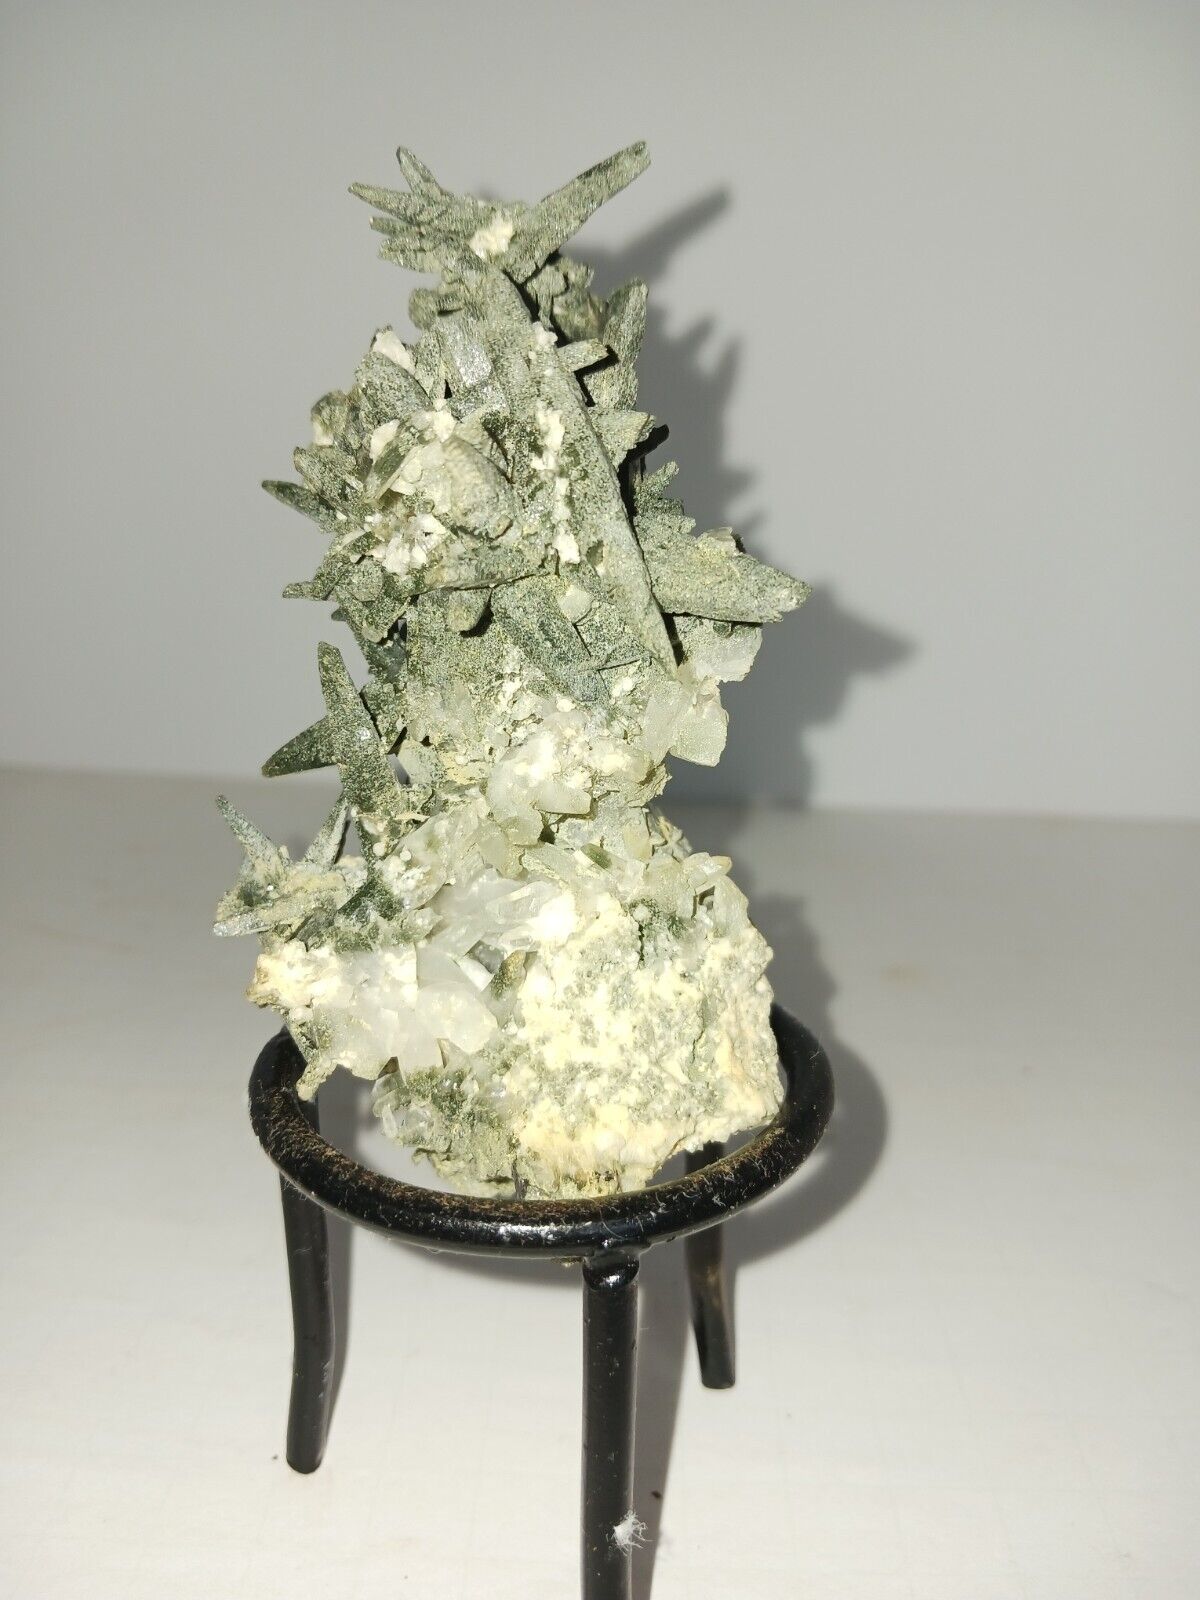 Spectacular Chlorite Quartz specimen from the Himalayas with rod iron stand